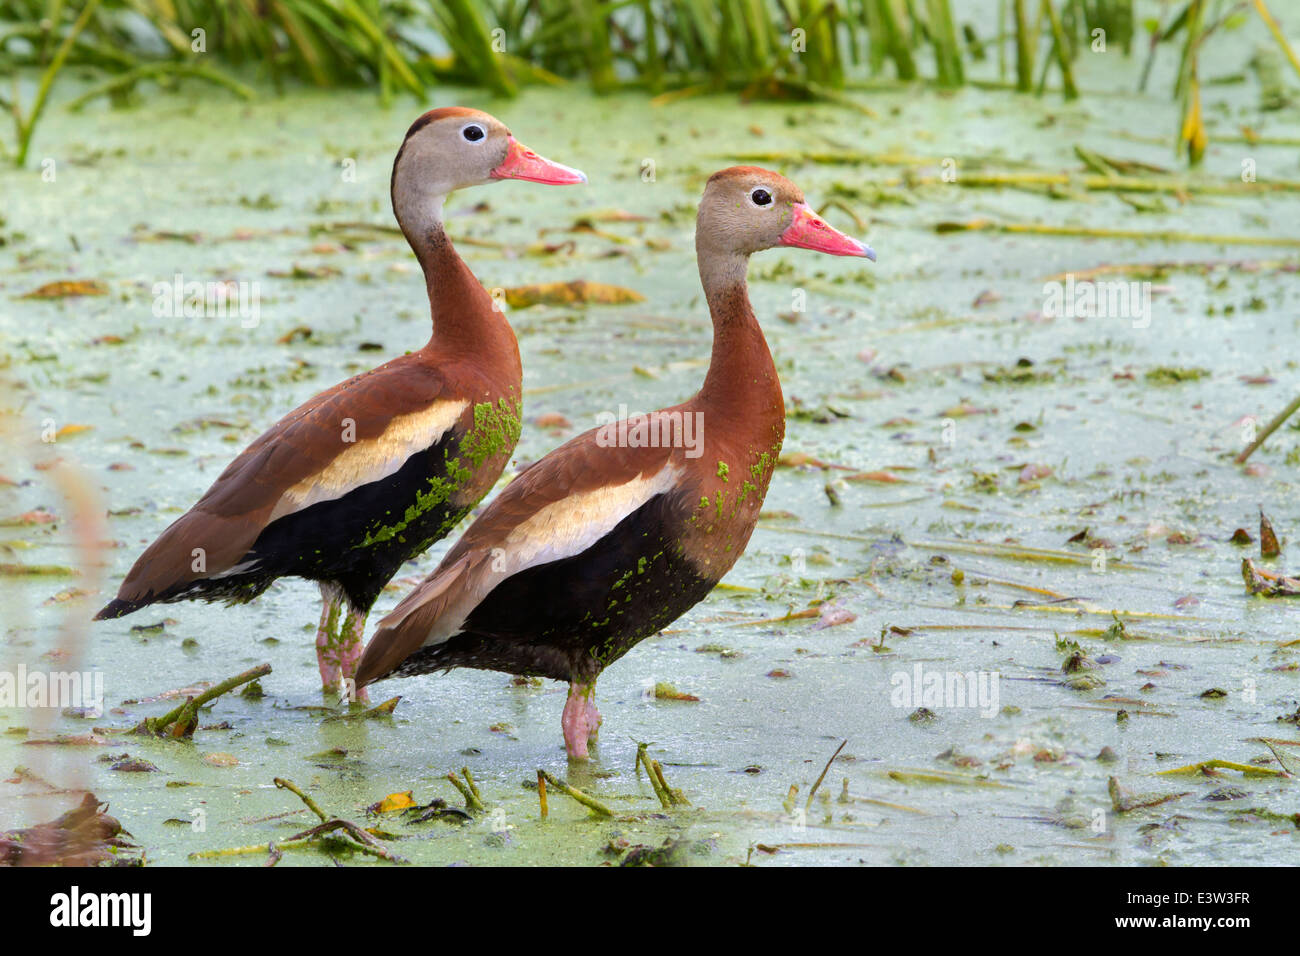 A pair of Black-bellied whistling ducks (Dendrocygna autumnalis) in a swamp covered with duckweed. Stock Photo